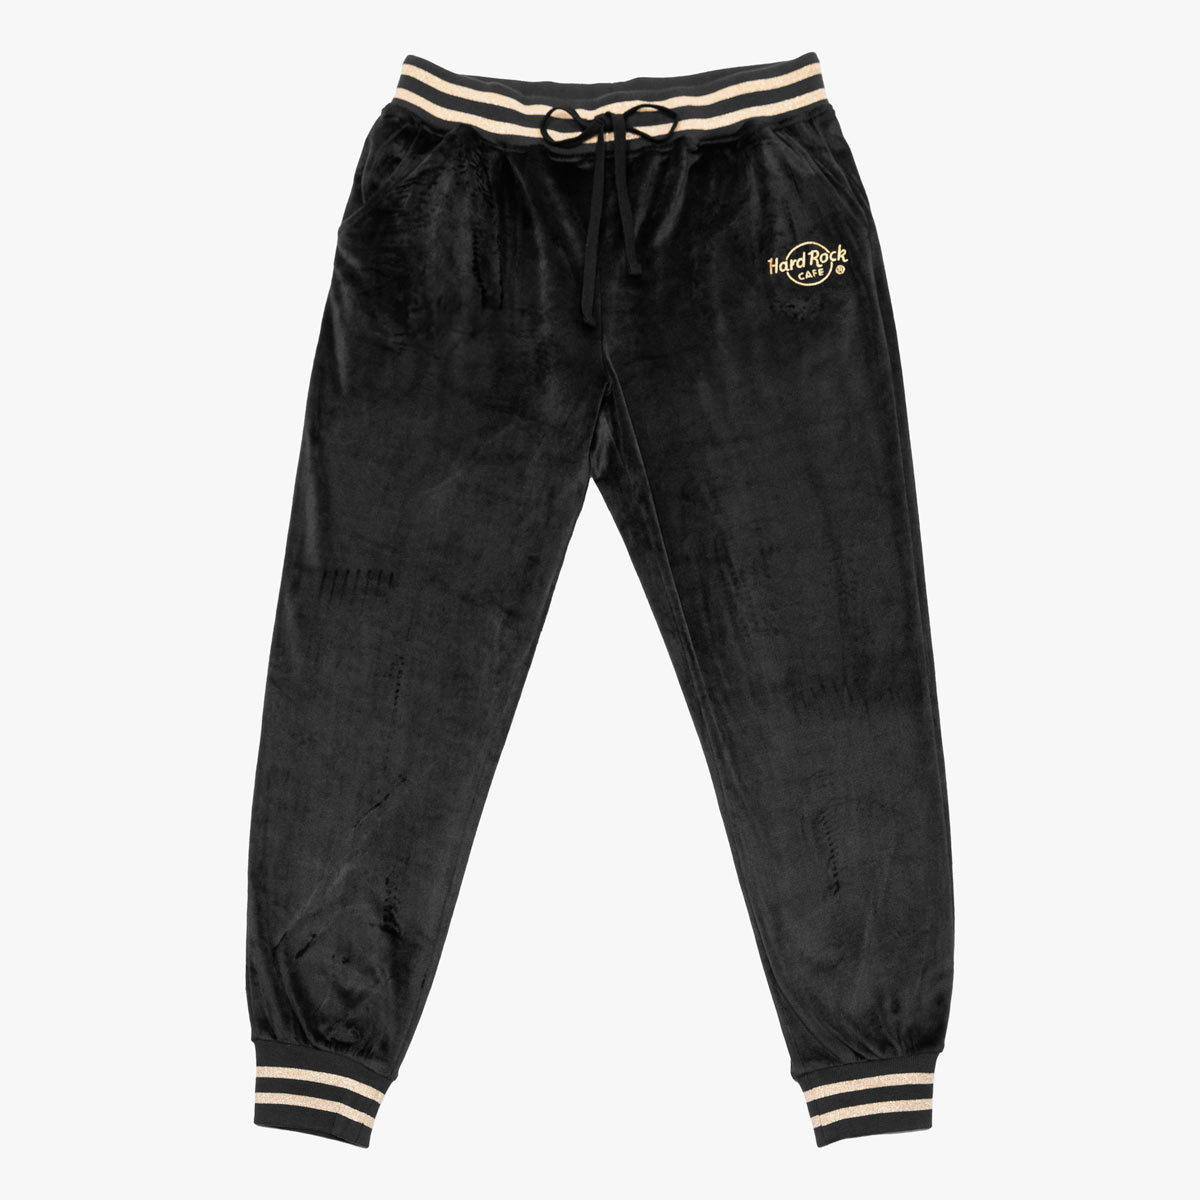 Velour Black and Metallic Gold Joggers by Hard Rock image number 1